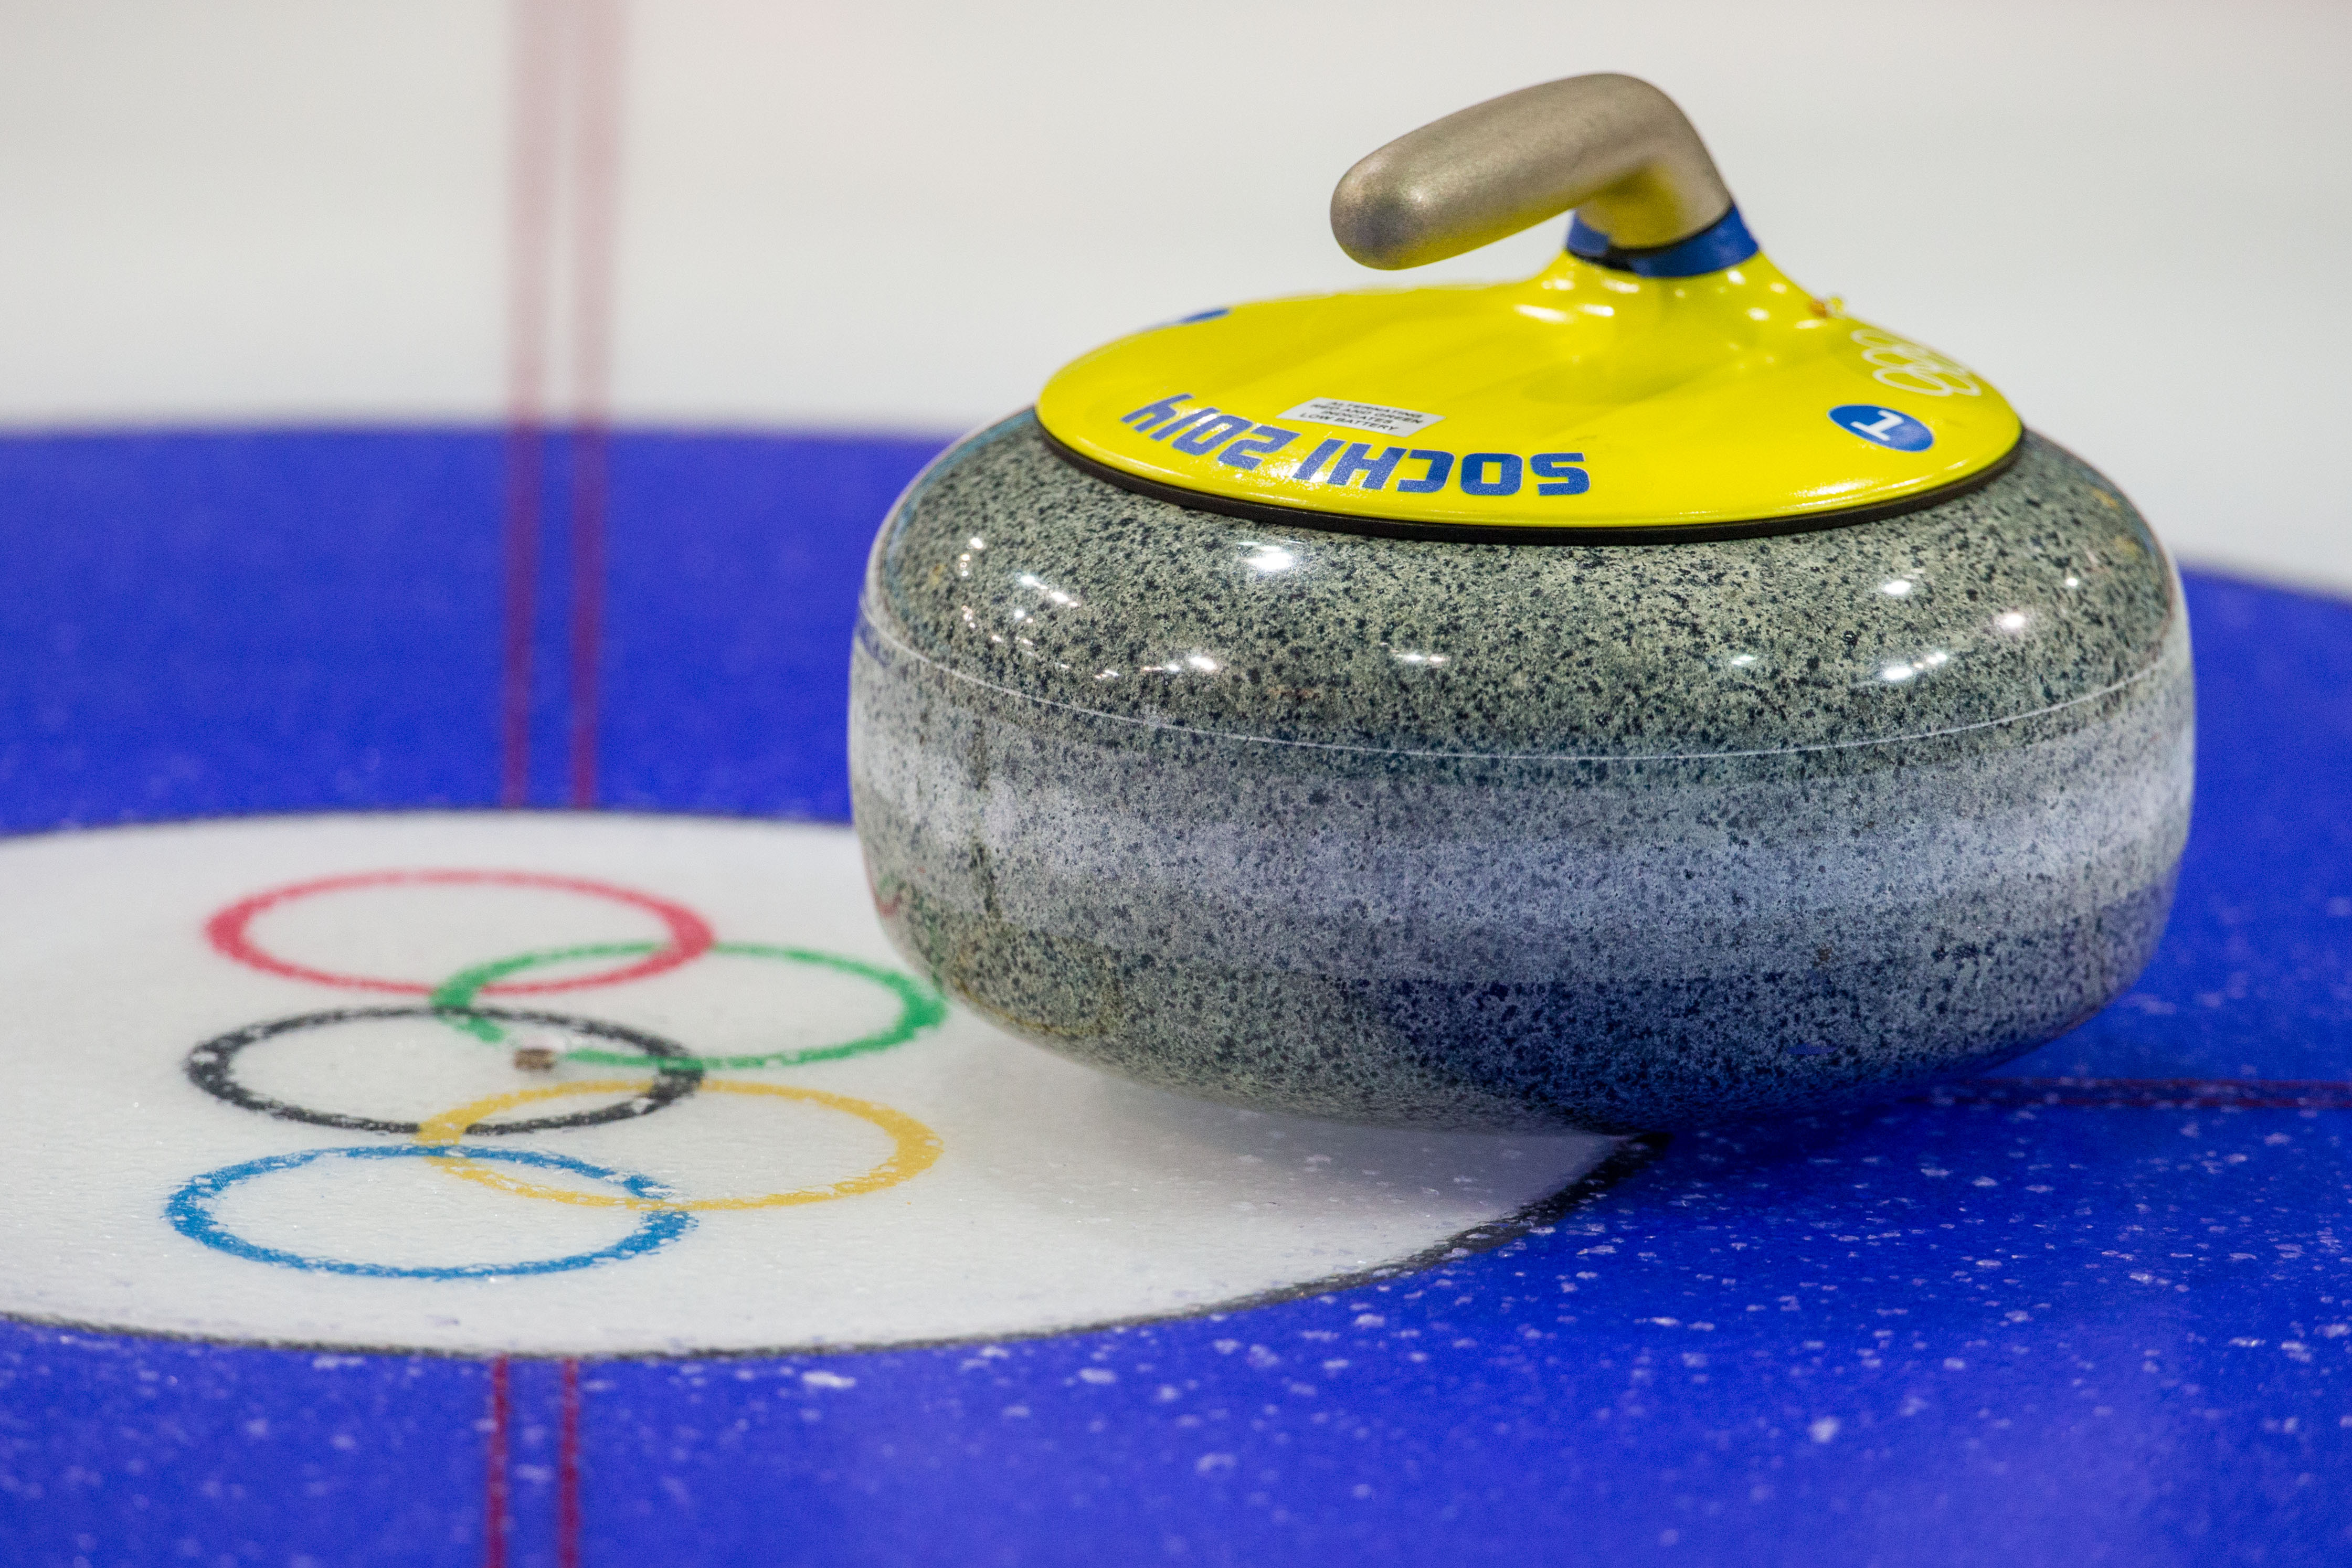 Stone For Curling At The Olympics In Sochi Wallpaper And